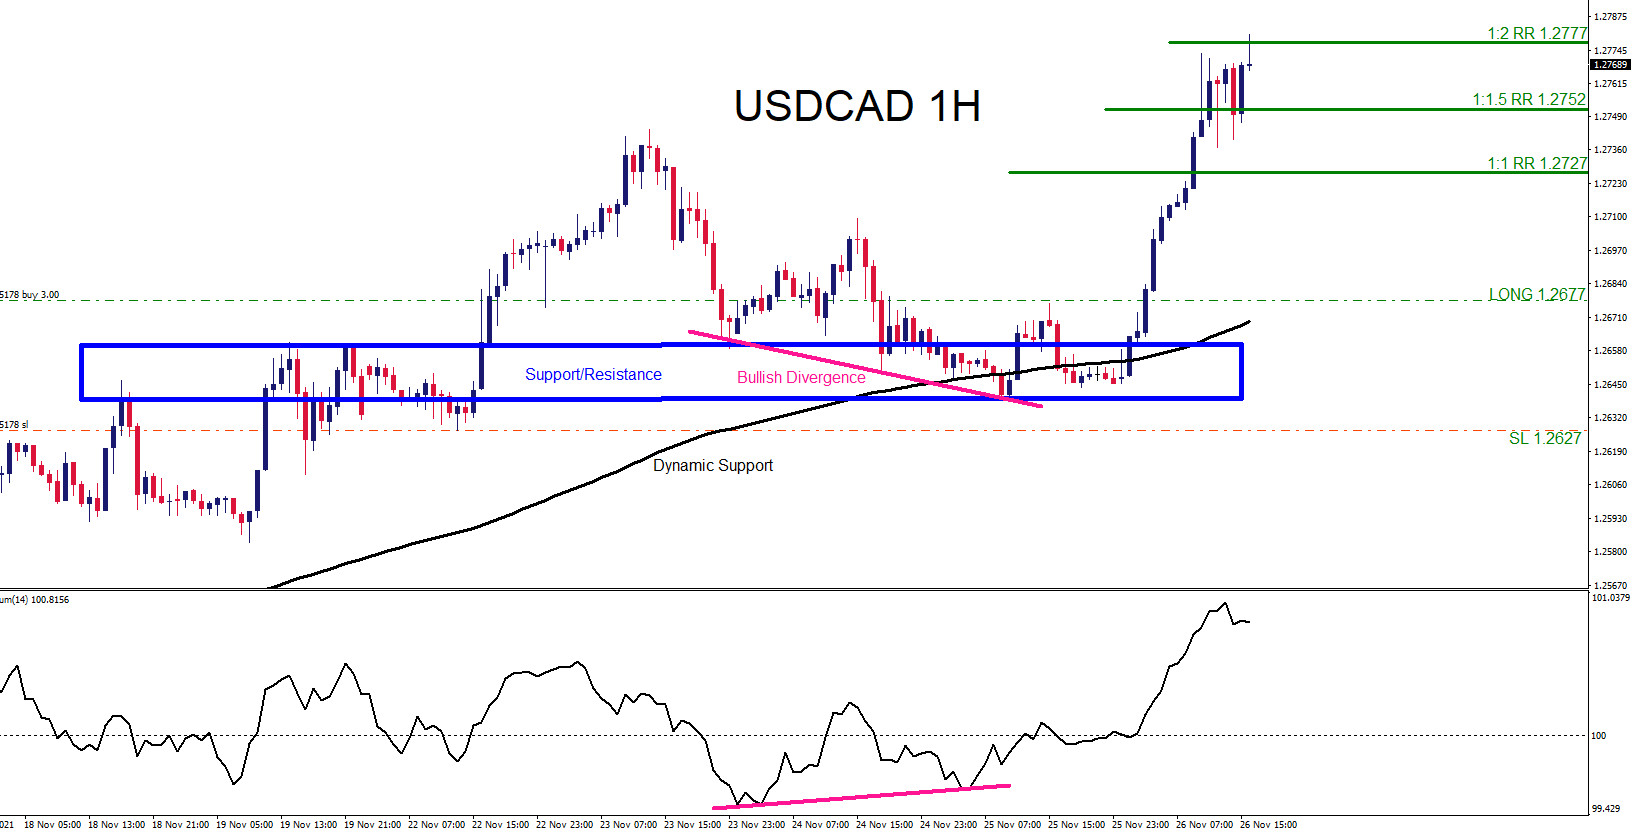 USDCAD : Trading the Move Higher